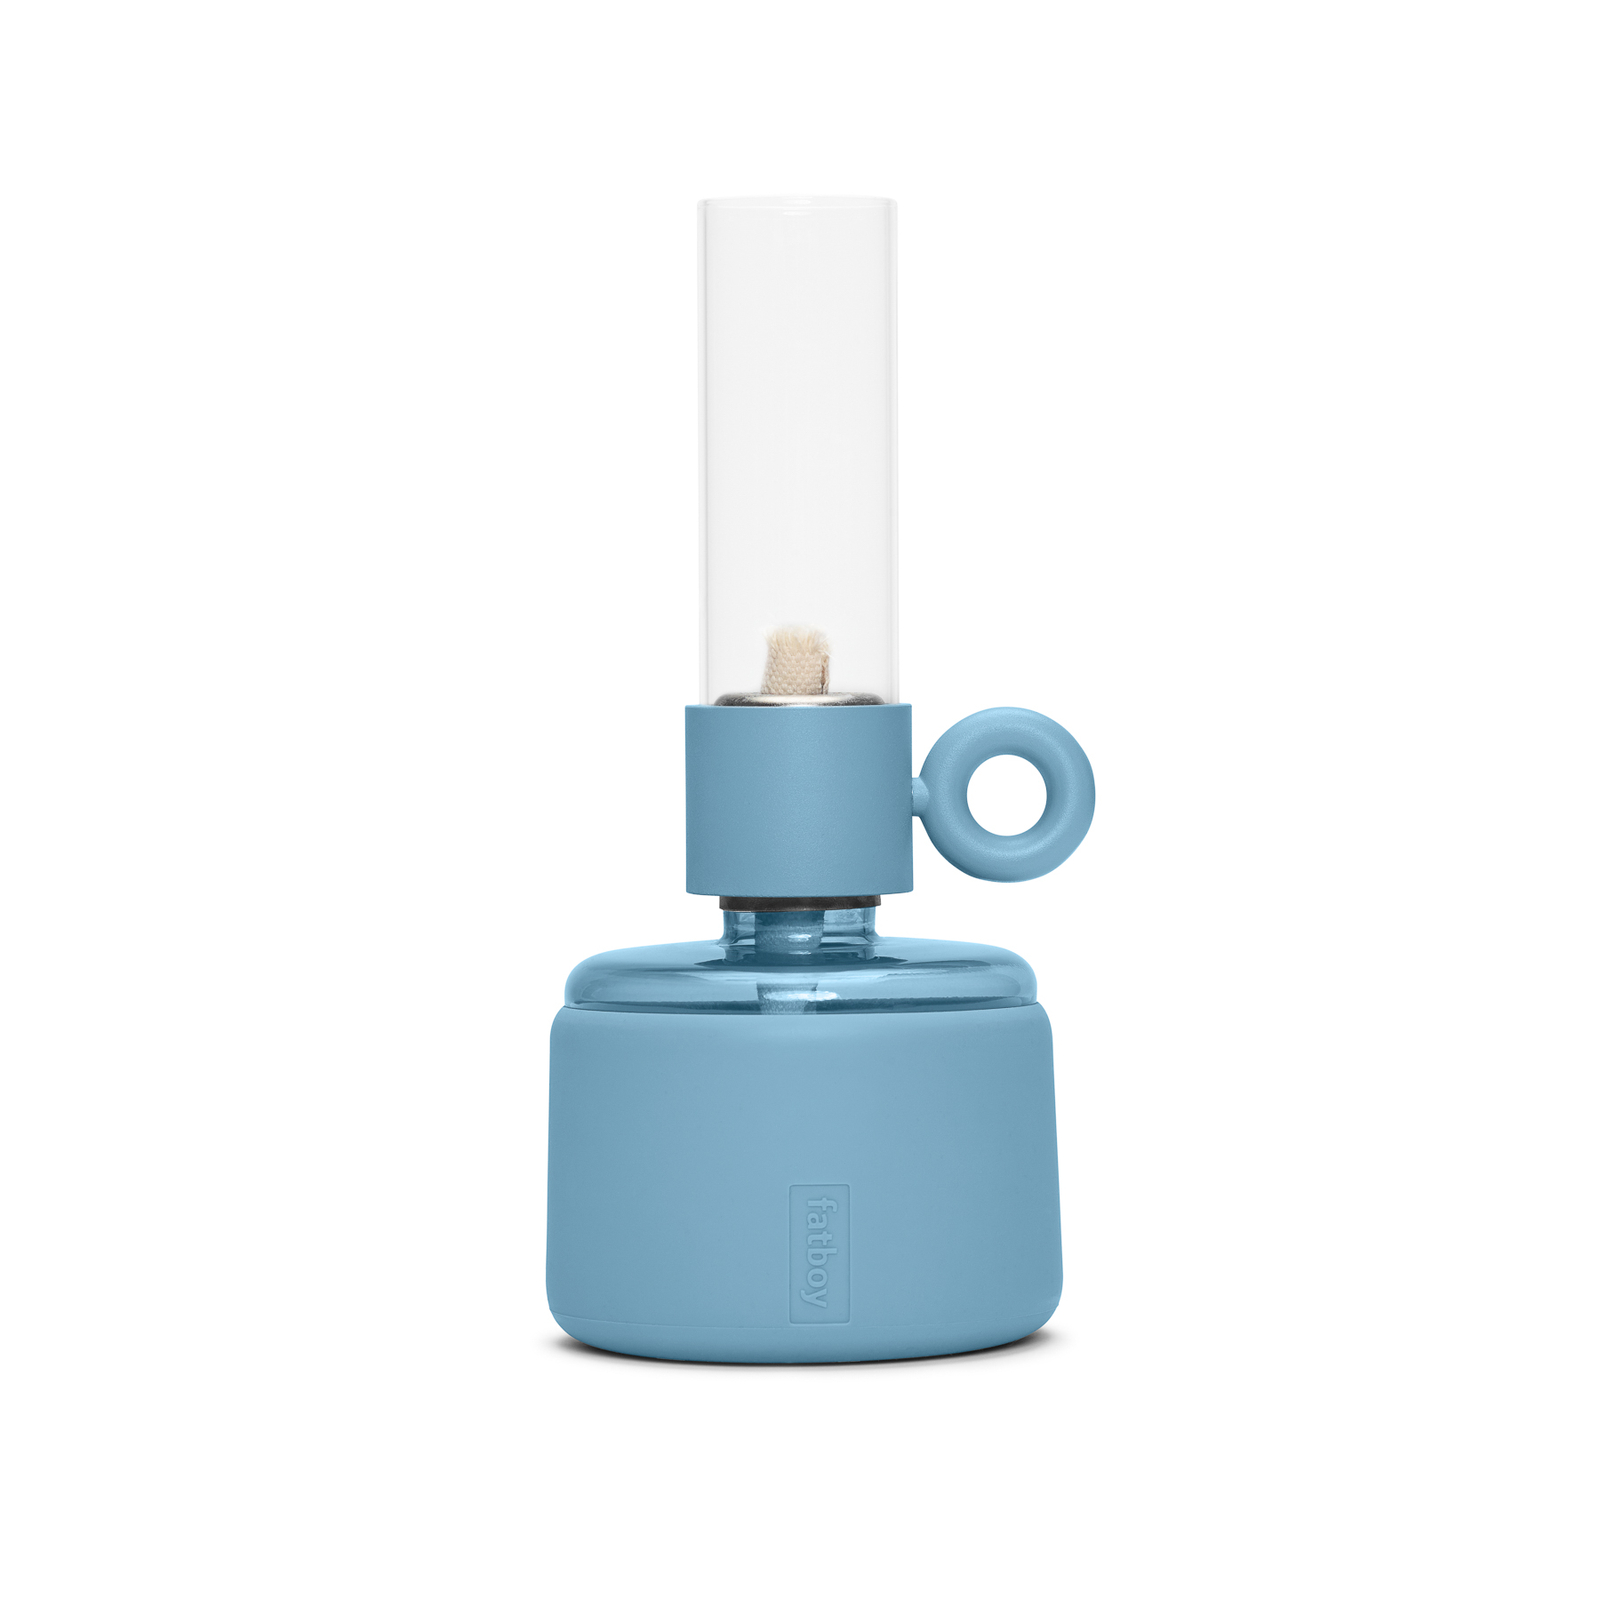 Fatboy Flamtastique XS oil lamp, ice blue